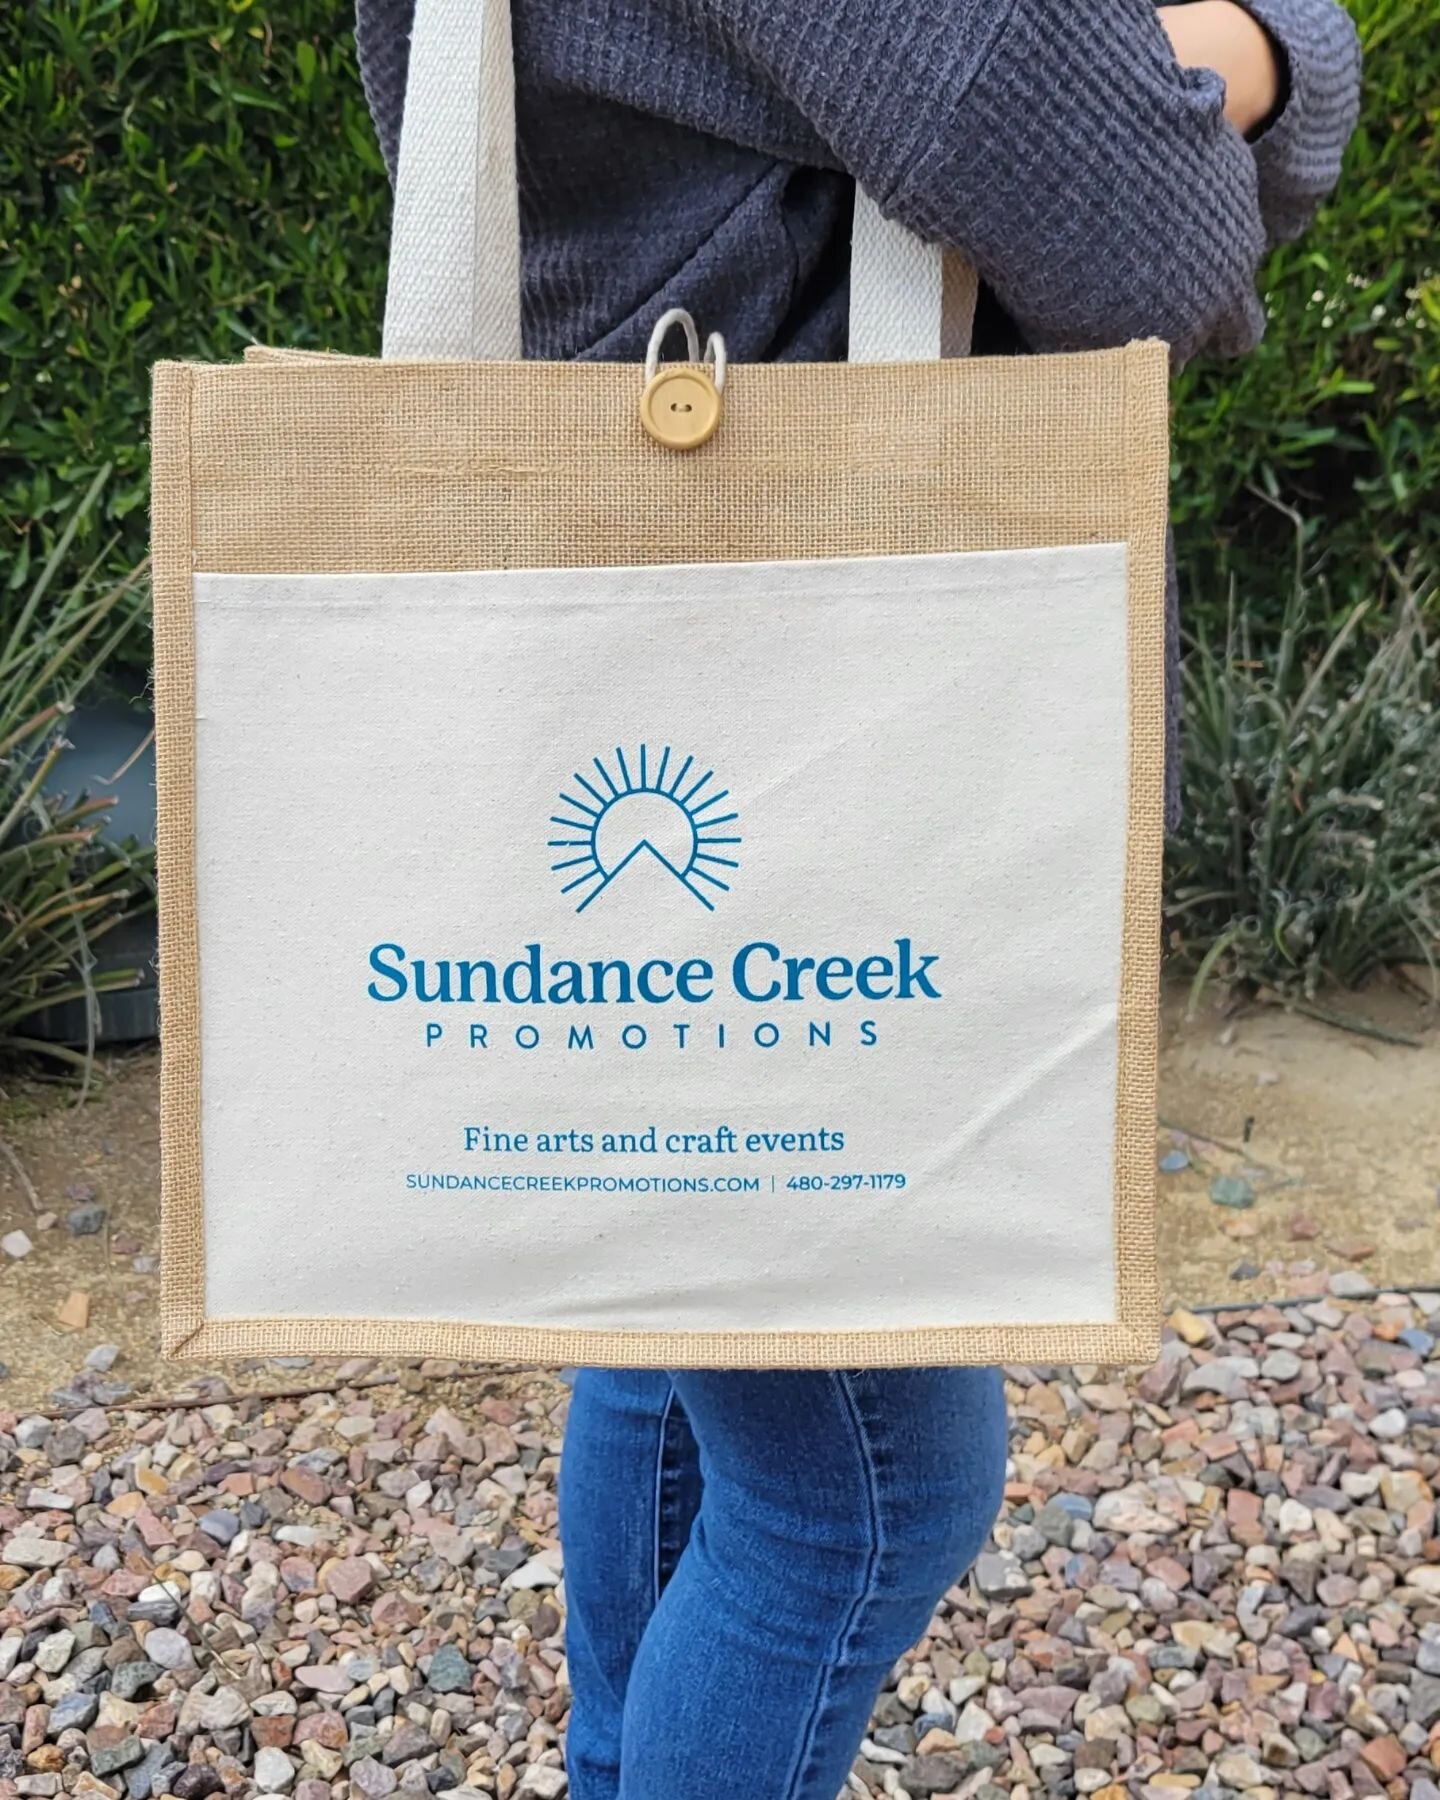 Day 3 - Sunday
We have 25 more tote bags to give out Sunday, 3/12. Just come by the @sundance.creek show booth on the south side of the courtyard near the candy shop to get your before they are gone.

Spring Art on the Boardwalk 
March 10-12, 2023, a